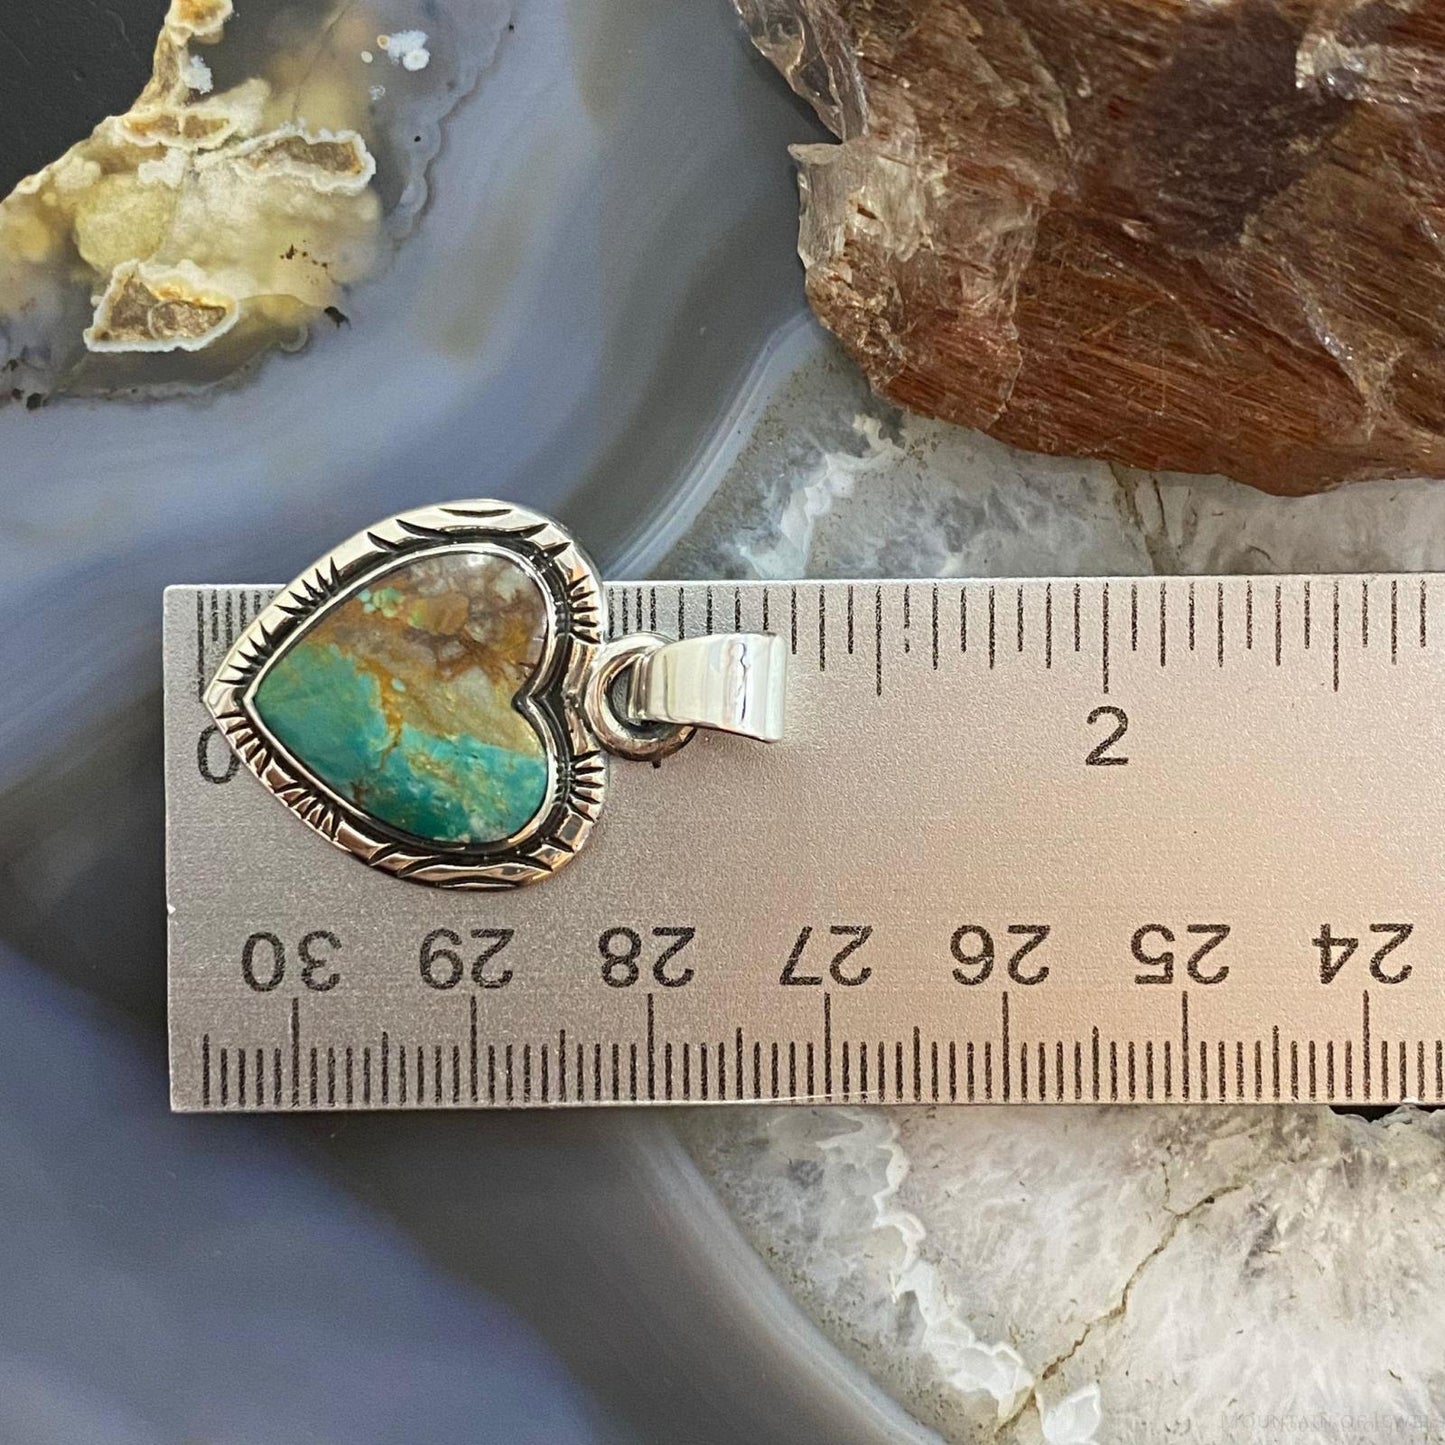 Native American Sterling Silver Turquoise w/Matrix Heart Pendant For Women